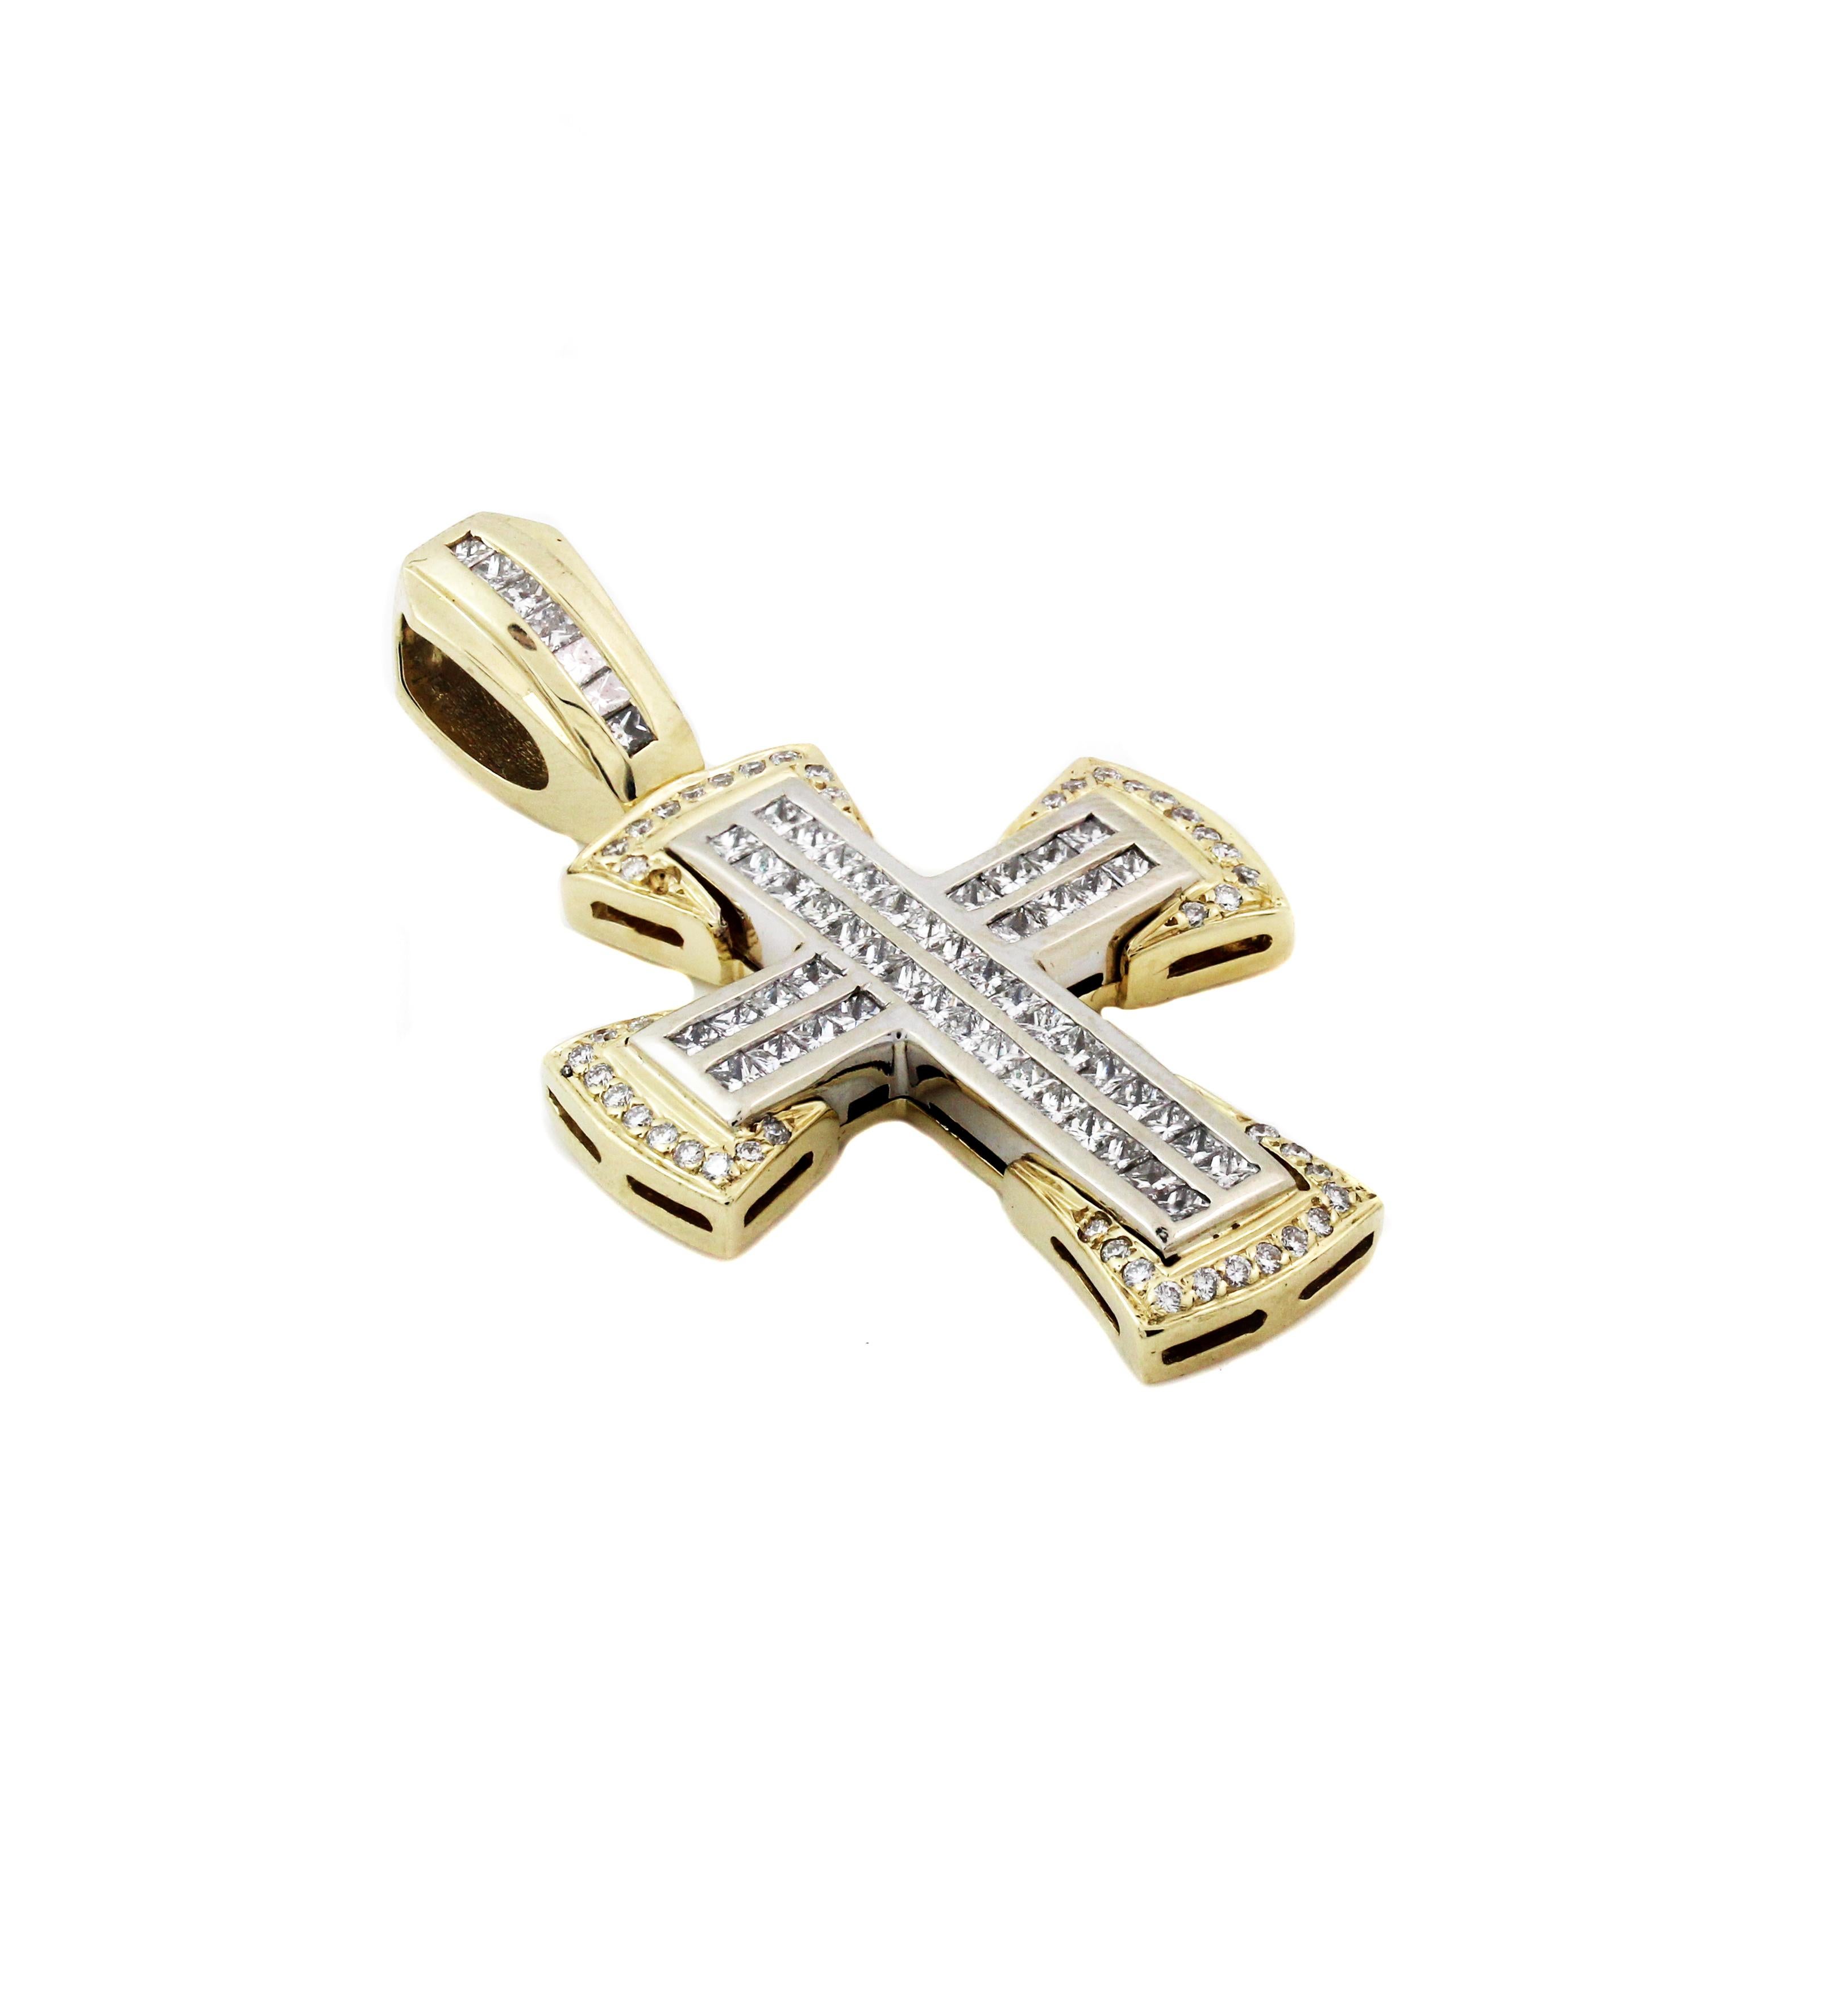 14K Yellow and White Gold Cross Pendant with Princess and Round cut diamonds

2.25 carat diamonds total weight

Pendant is 2.25 inch length x 1.3 inch width